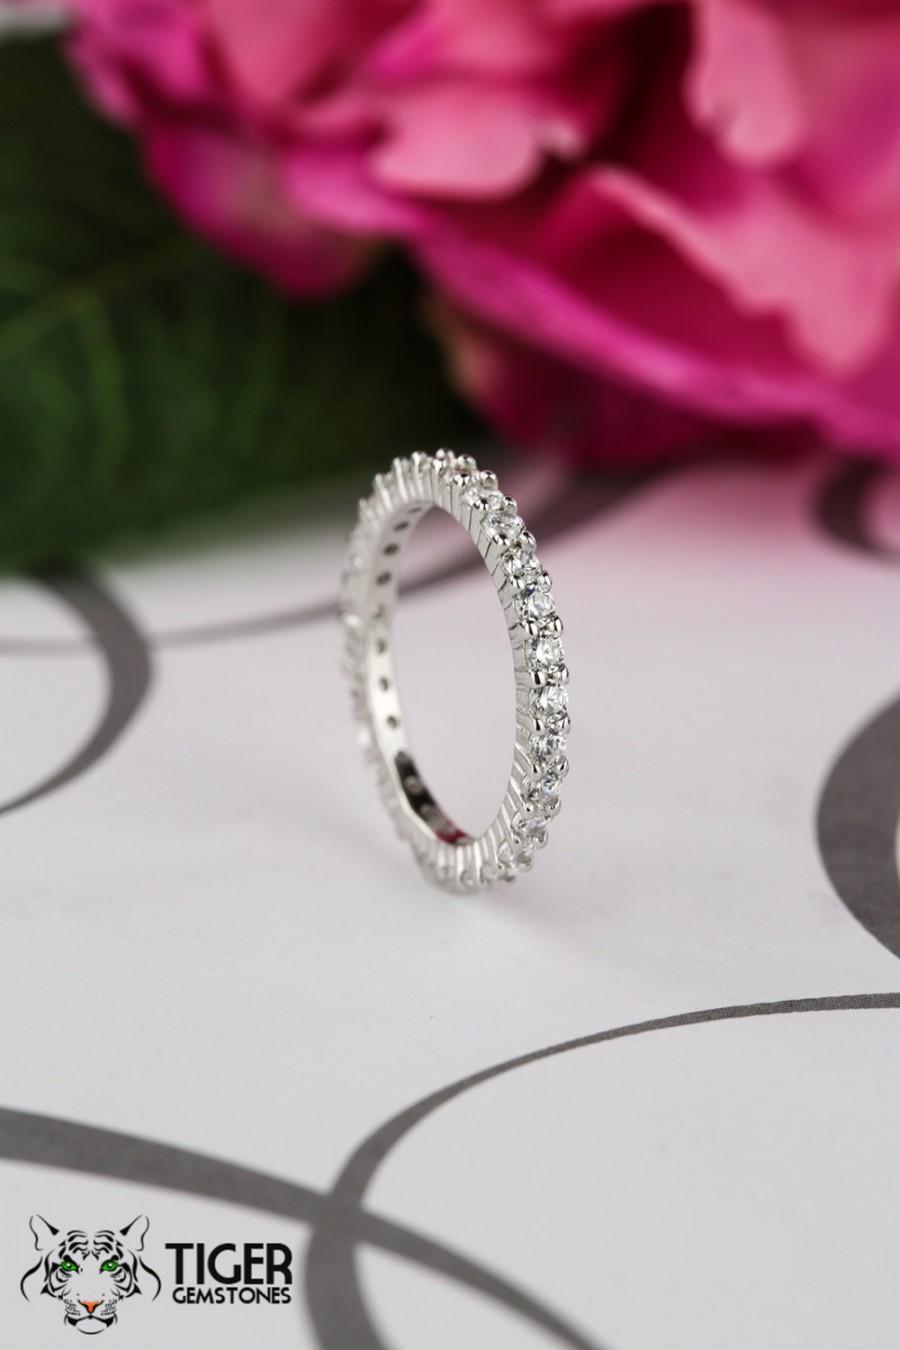 Hochzeit - 1 ctw Eternity Band, 2mm Wedding Band, Engagement Ring, Man Made Diamond Simulant, Bridal Ring, Sterling Silver, Promise Ring, Wedding Ring